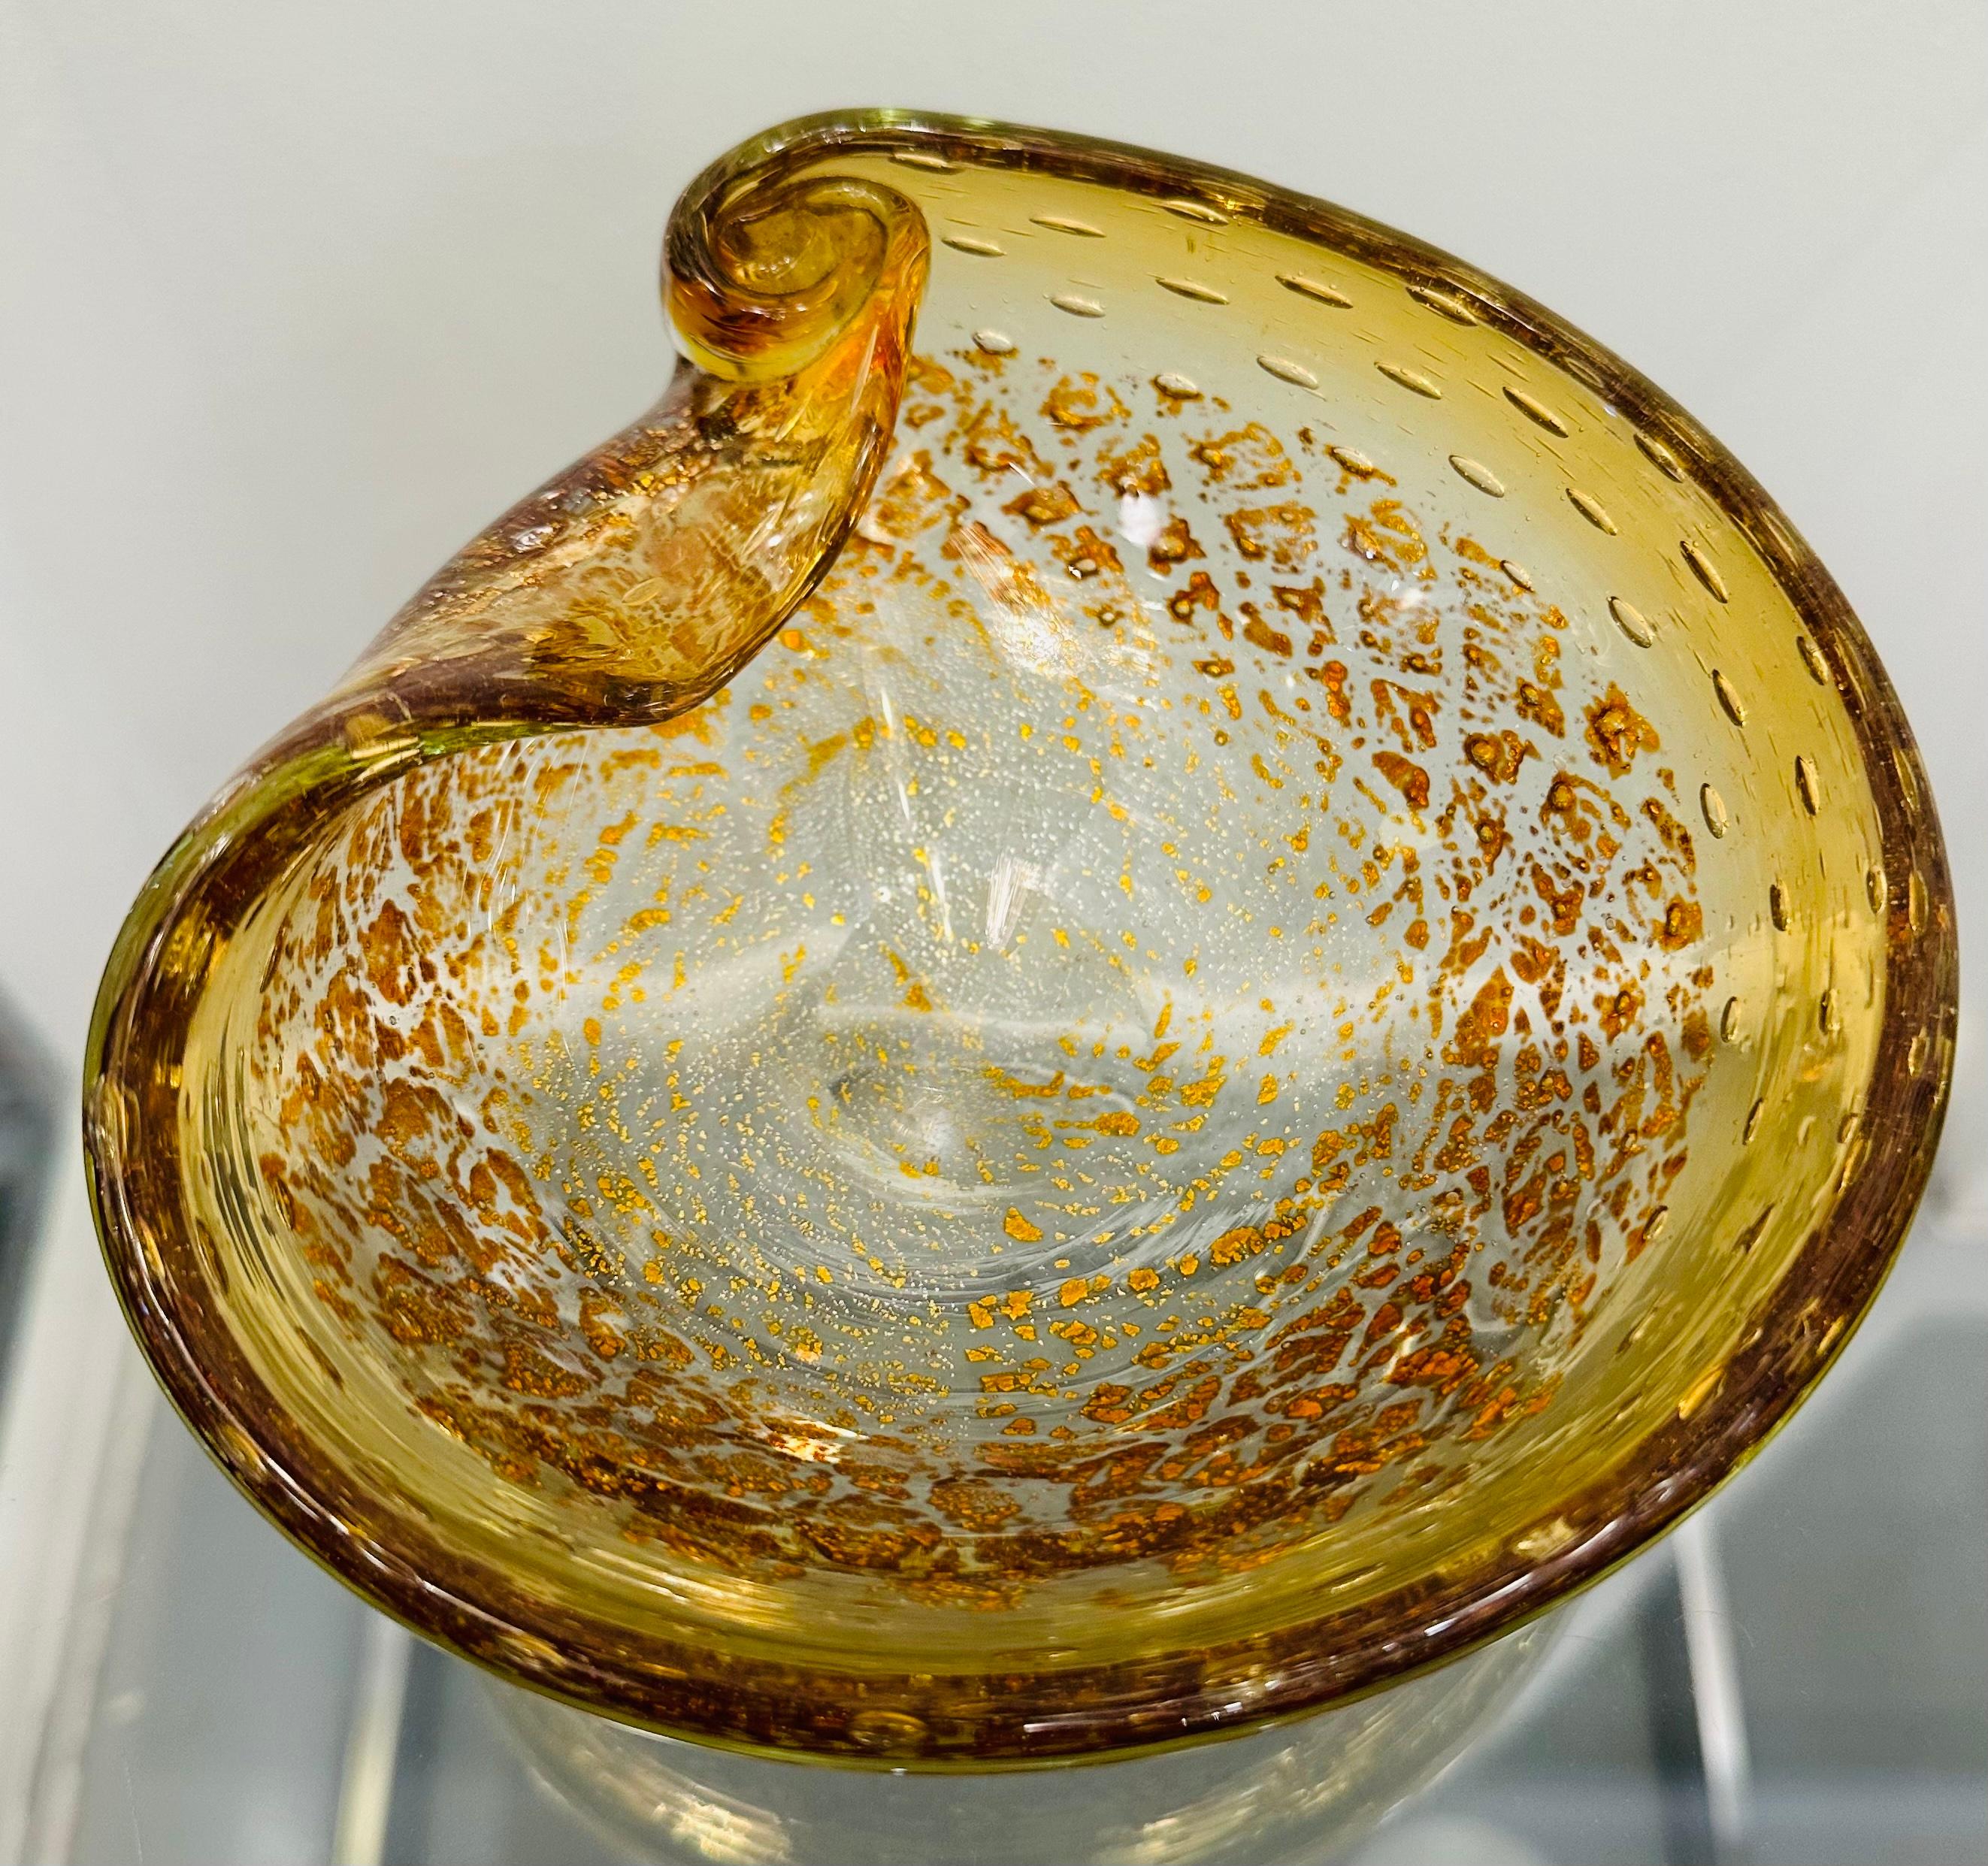 20th Century 1960s Italian Murano Golden Inclusion Clear Glass Bowl, Candy Dish or Ashtray For Sale